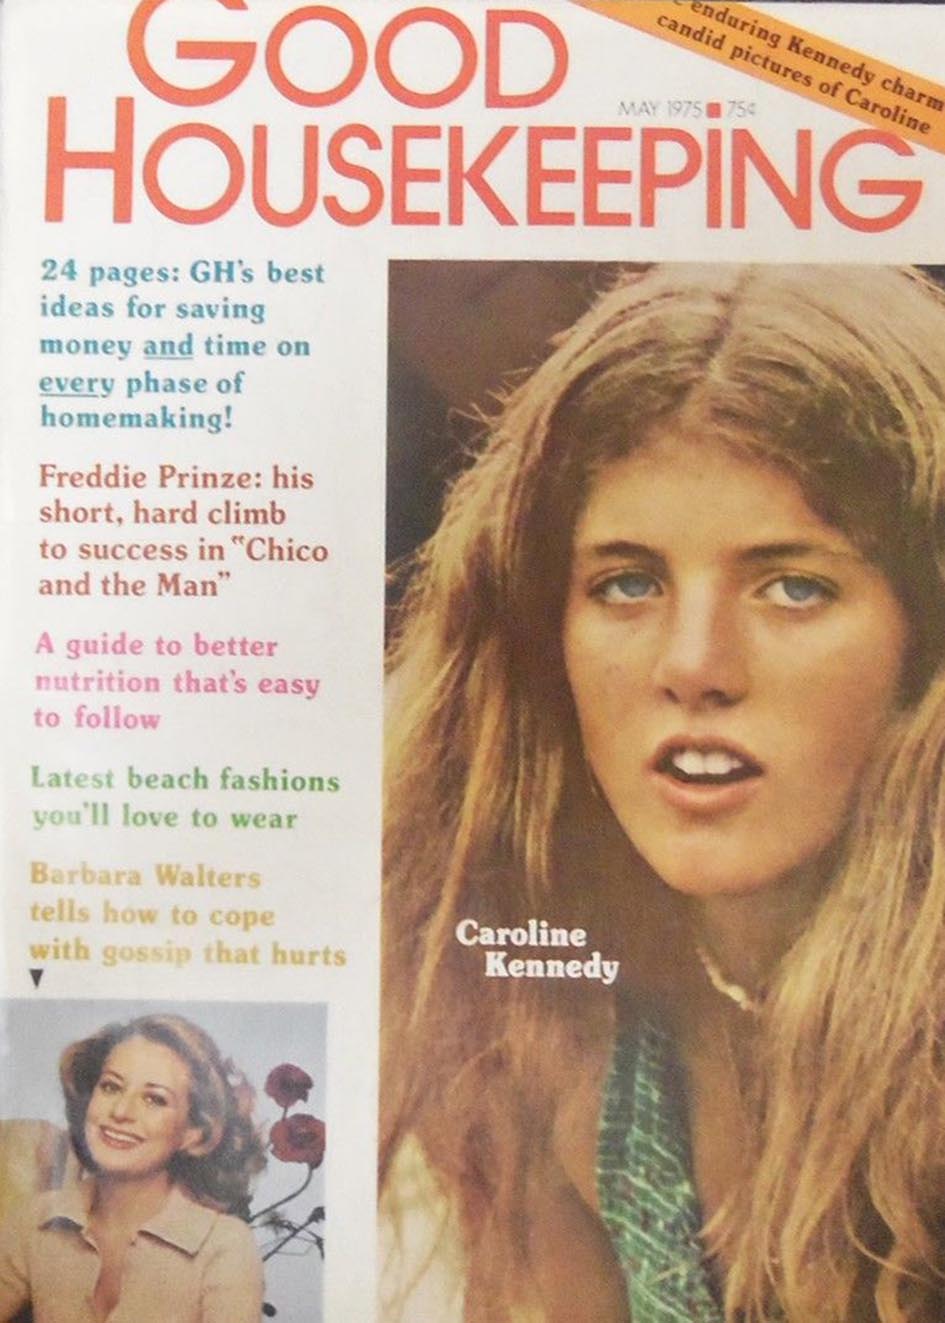 Good Housekeeping May 1975 magazine back issue Good Housekeeping magizine back copy Good Housekeeping May 1975 American womens magazine Back Issue Published by Hearst Publishing Corporation. 24 Pages: GH's Best Ideas For Saving Money And Time On Every Phase Of Homemaking!.